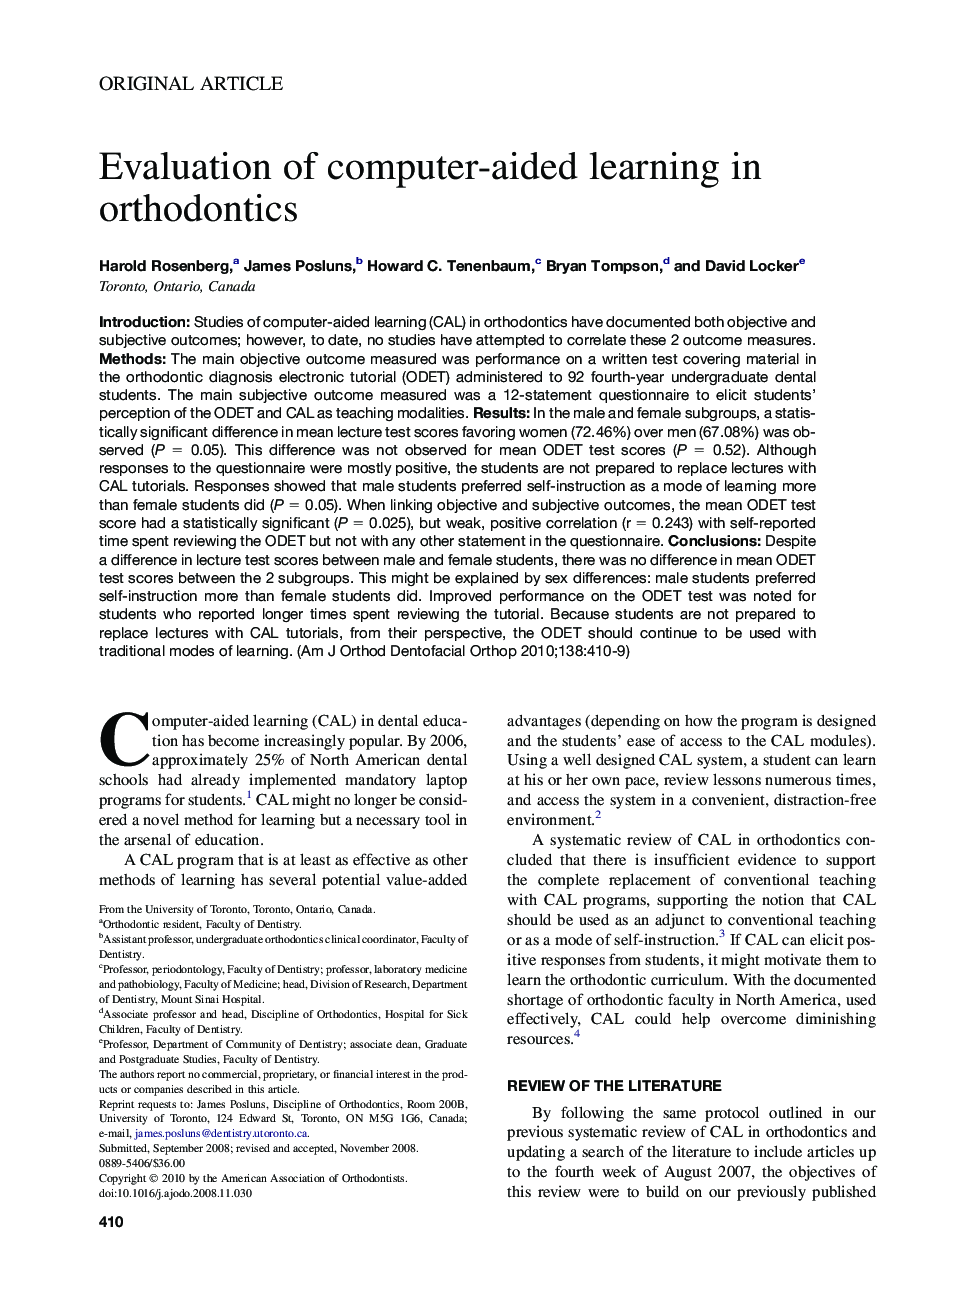 Evaluation of computer-aided learning in orthodontics 